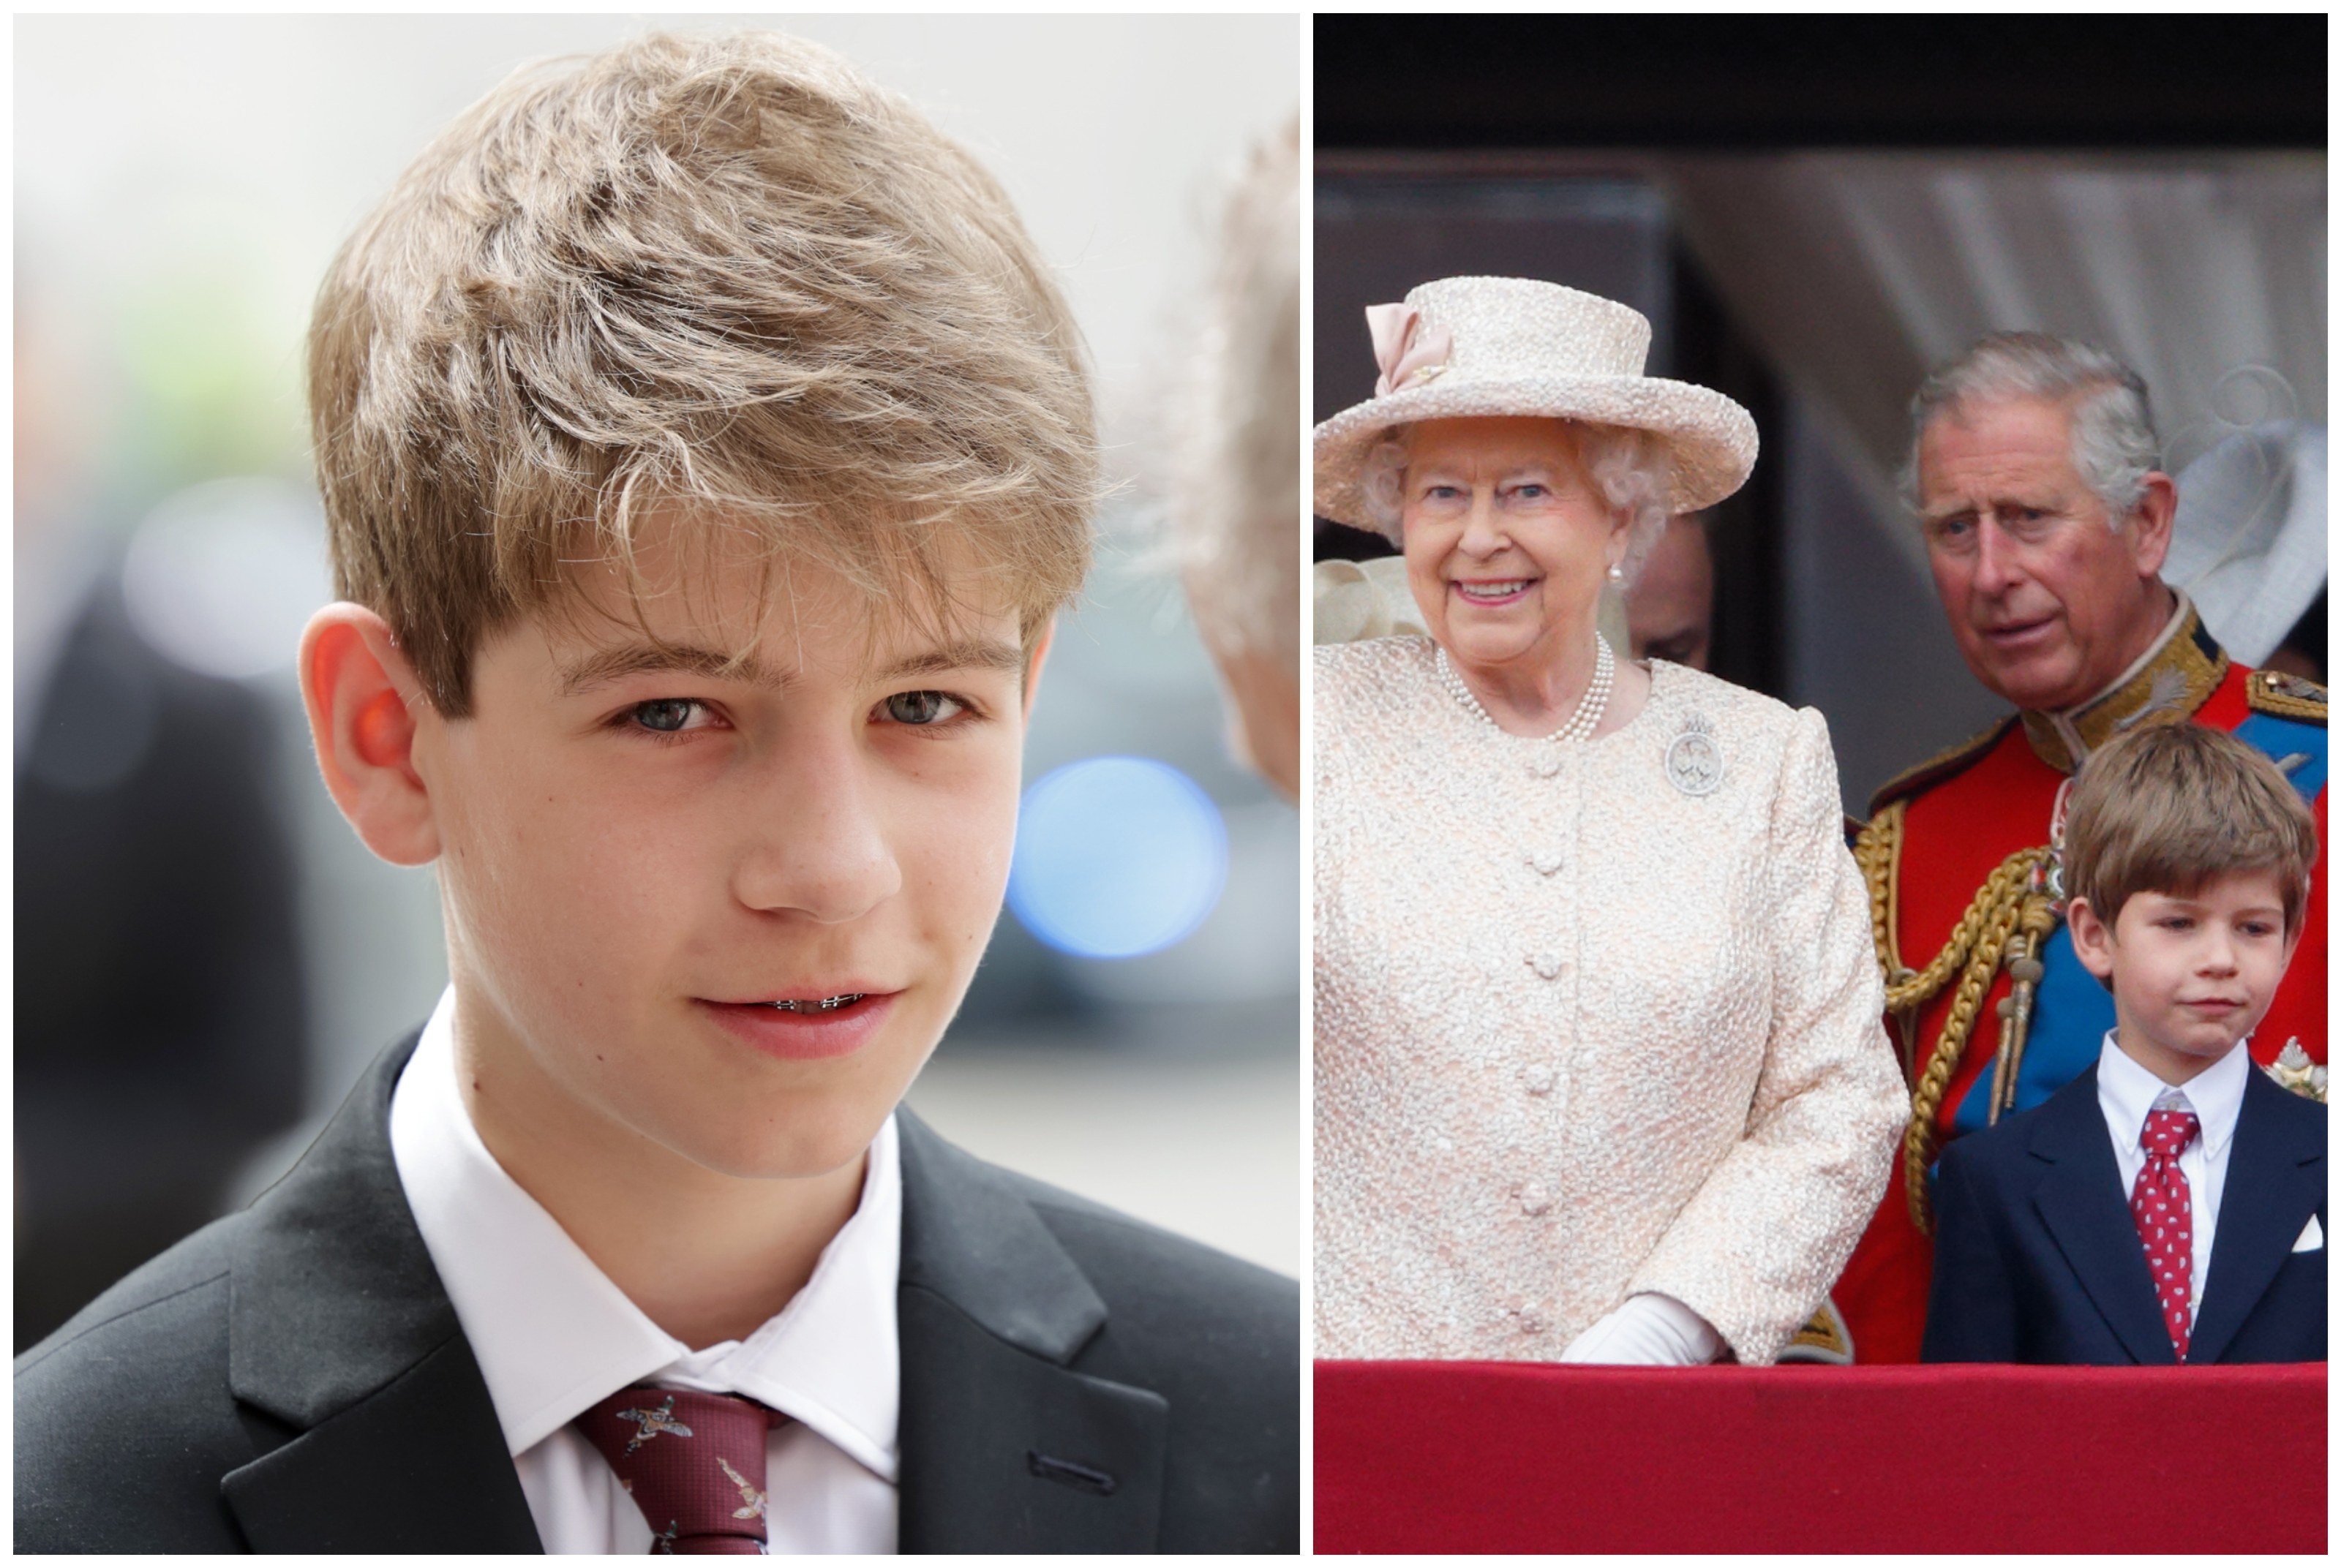 James, Viscount Severn, is the grandchild of Britain’s Queen Elizabeth and the nephew of Prince Charles. Photos: Getty Images